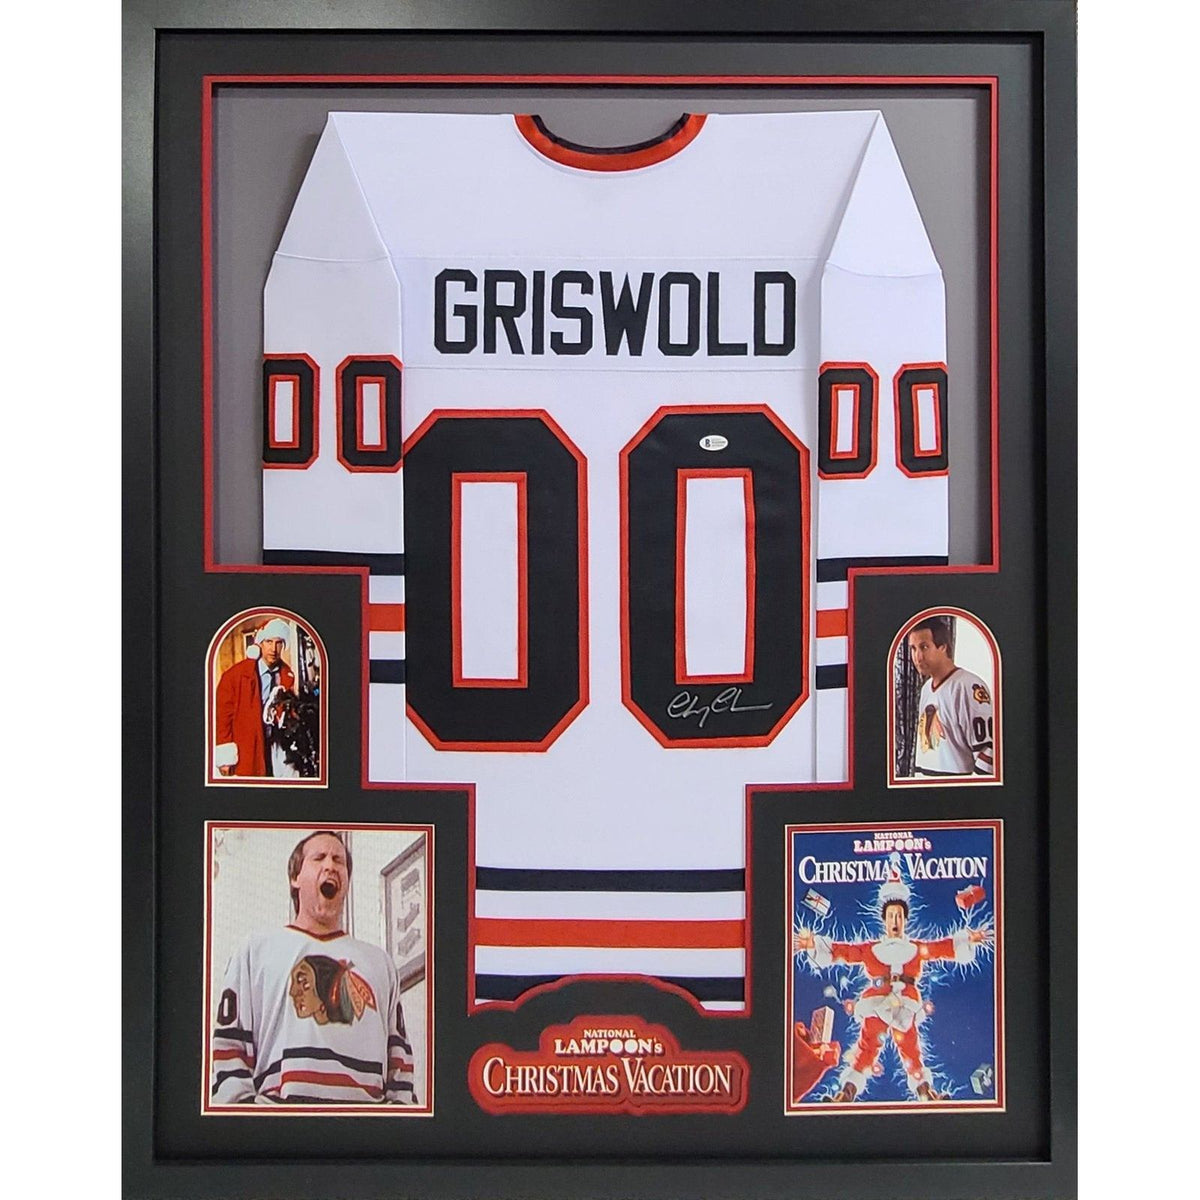 christmas vacation griswold jersey, Off 68%